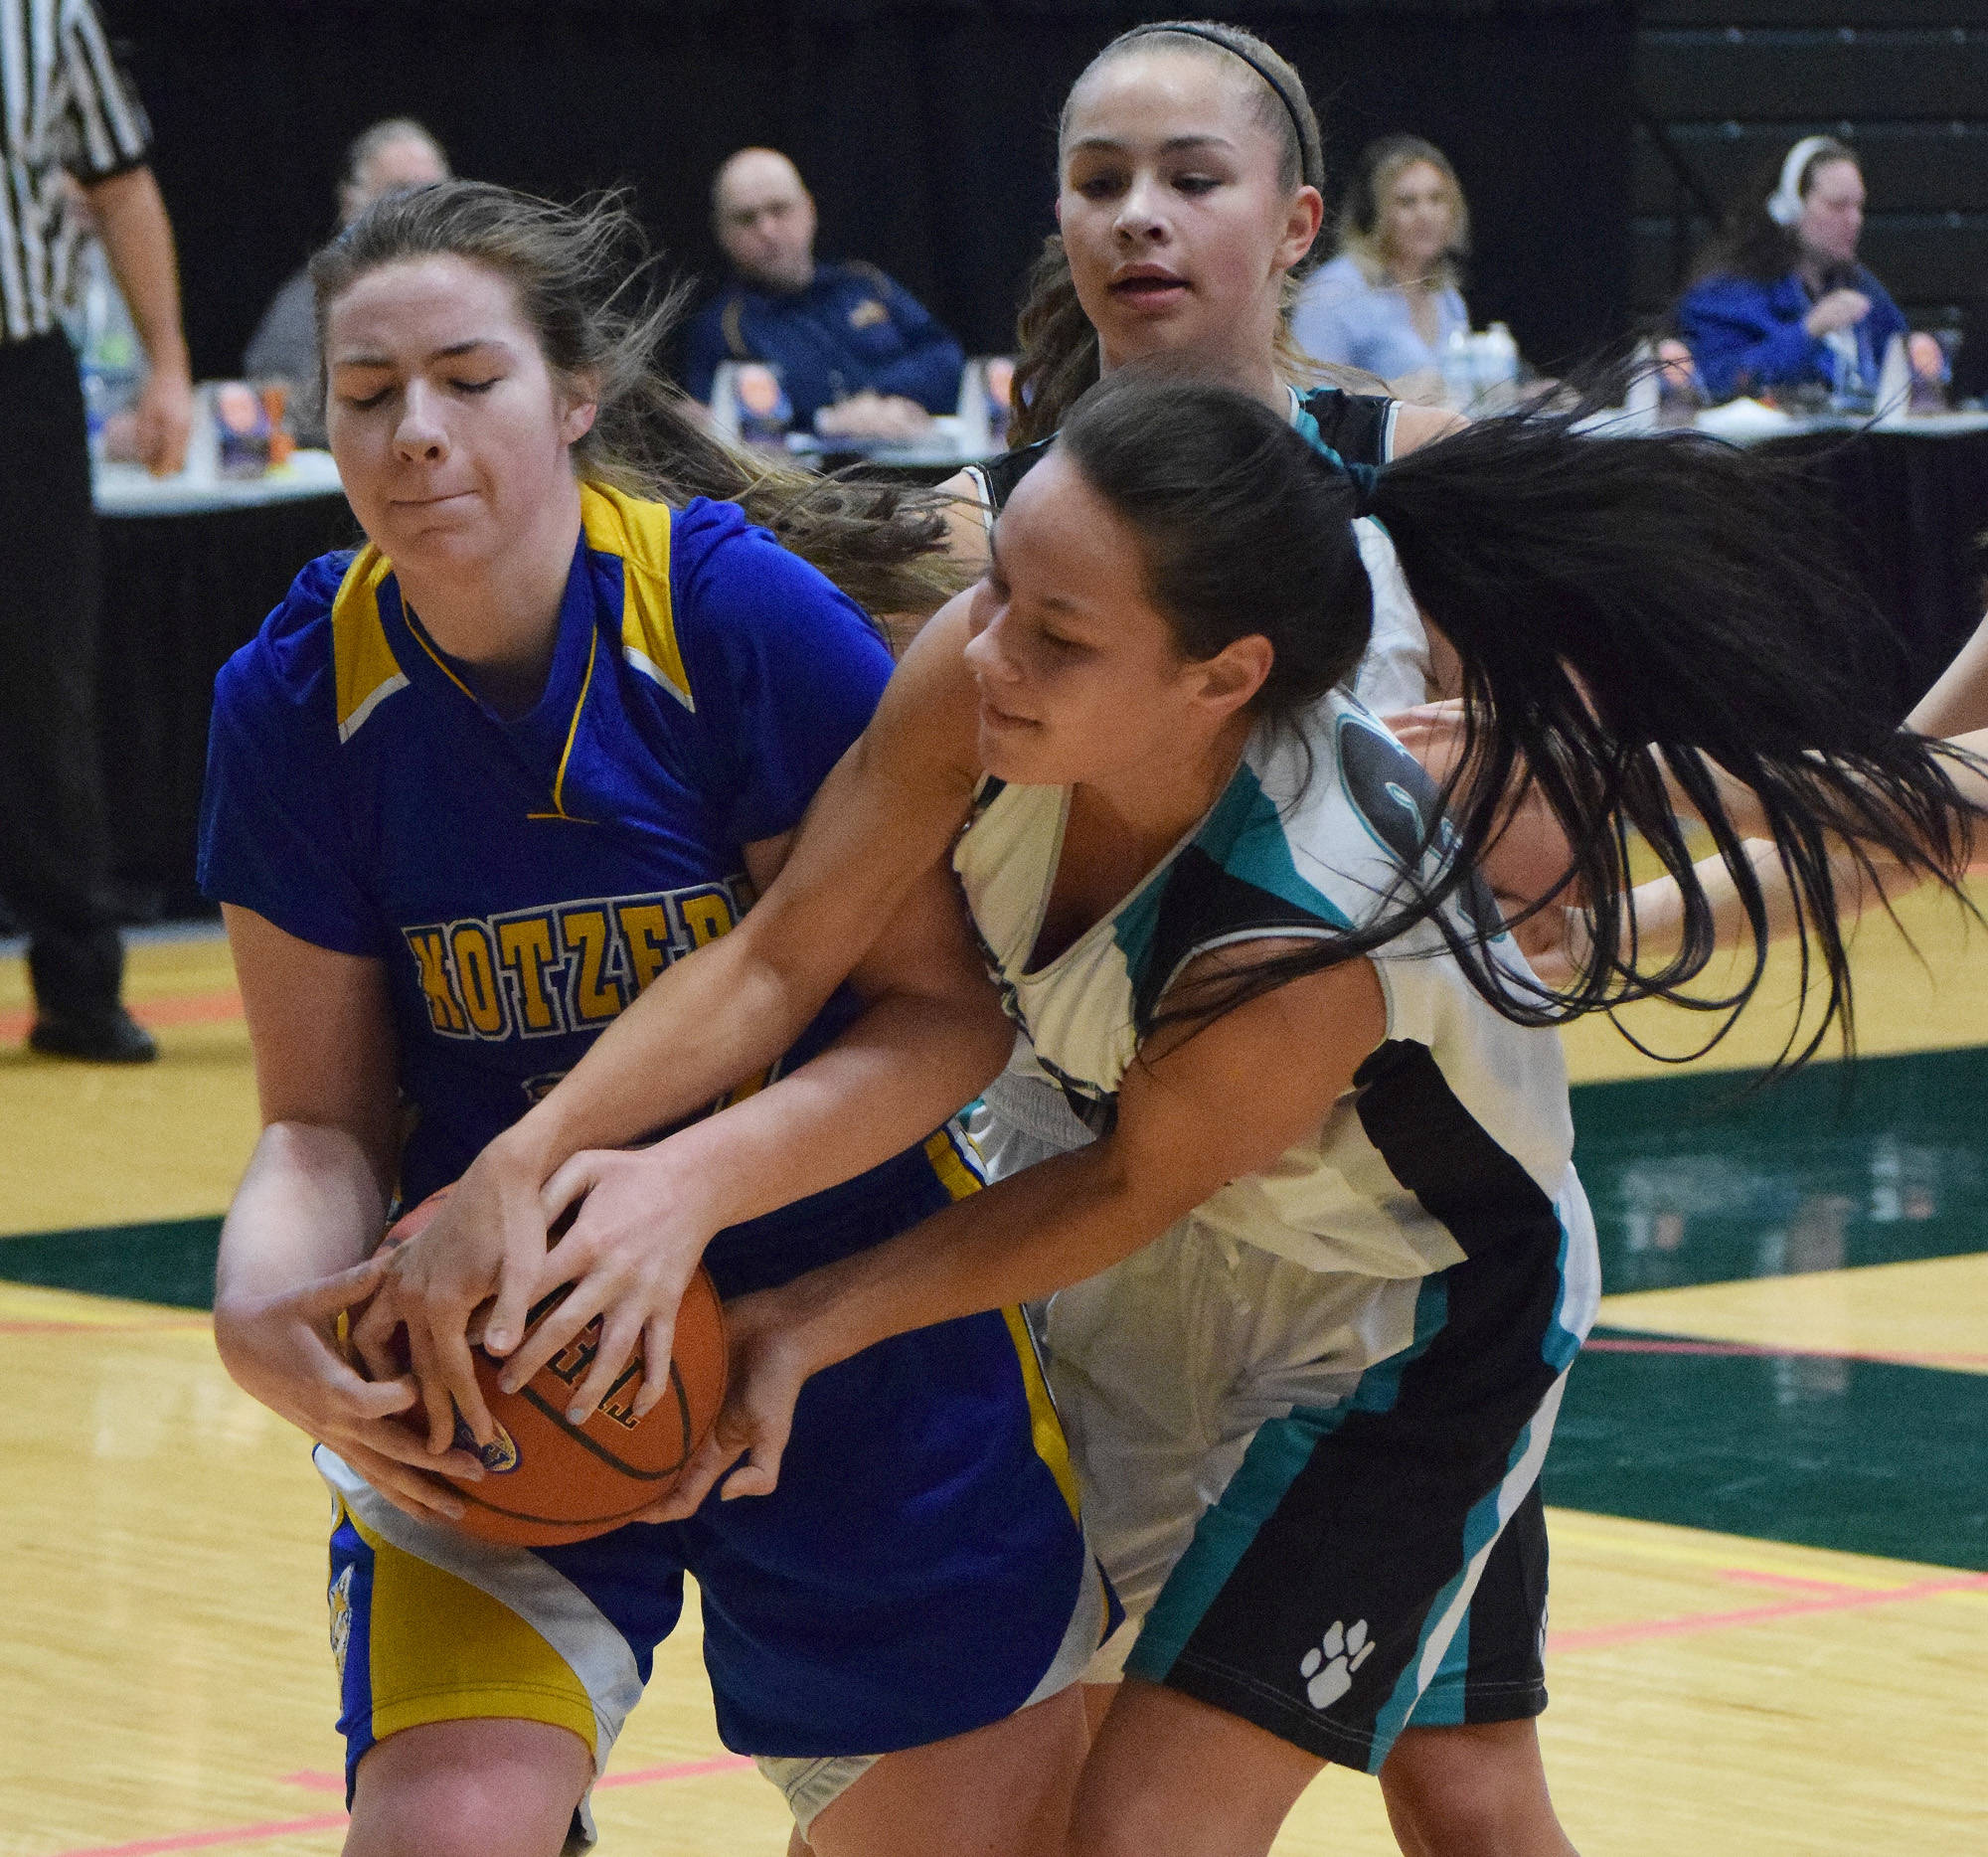 Kotzebue’s Payton McConnell (left) battles for a rebound with Nikiski’s Rylee Jackson, Friday at the Class 3A state tournament at the Alaska Airlines Center. (Photo by Joey Klecka/Peninsula Clarion)